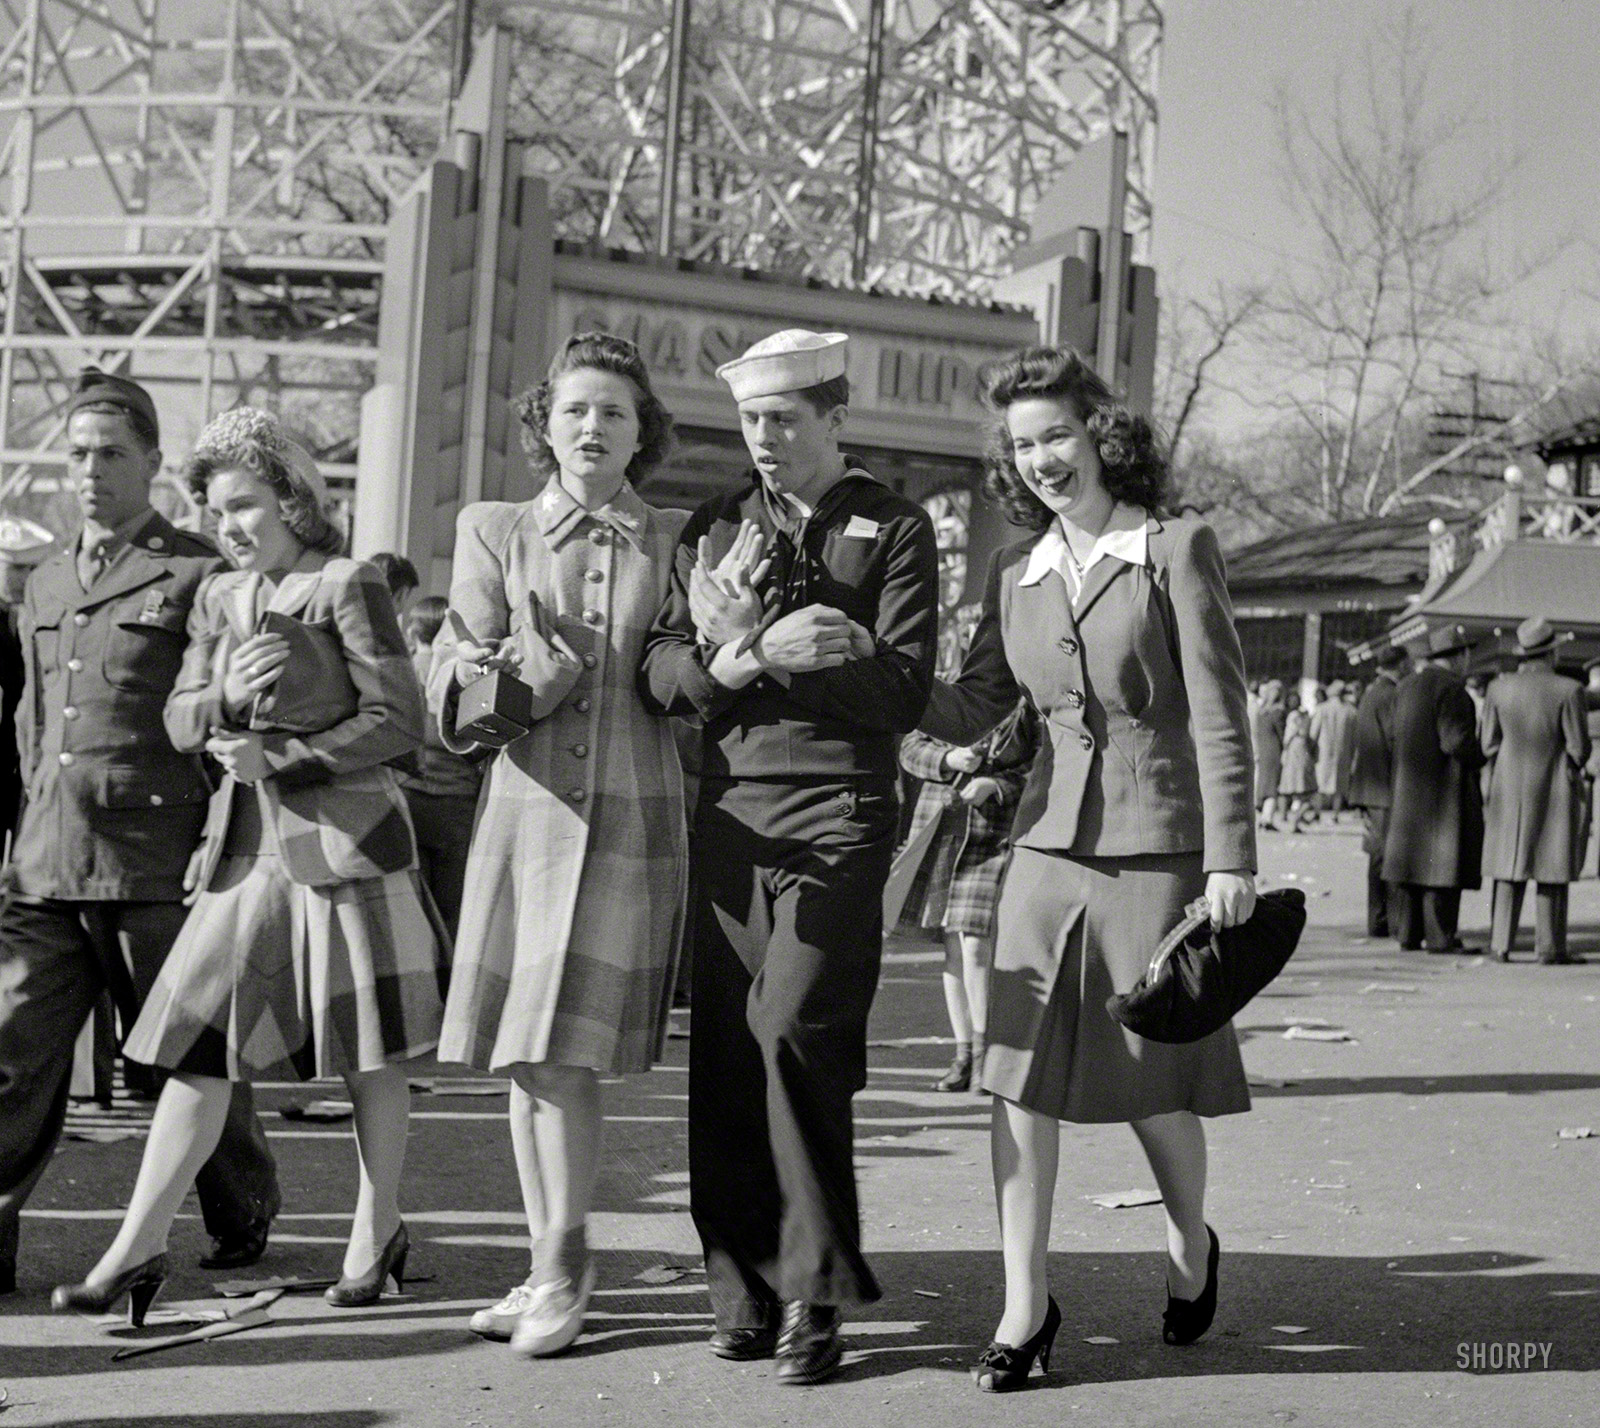 April 1943. Montgomery County, Maryland. "Servicemen and their girls at the Glen Echo amusement park." Medium format nitrate negative by Esther Bubley for the Office of War Information. View full size.